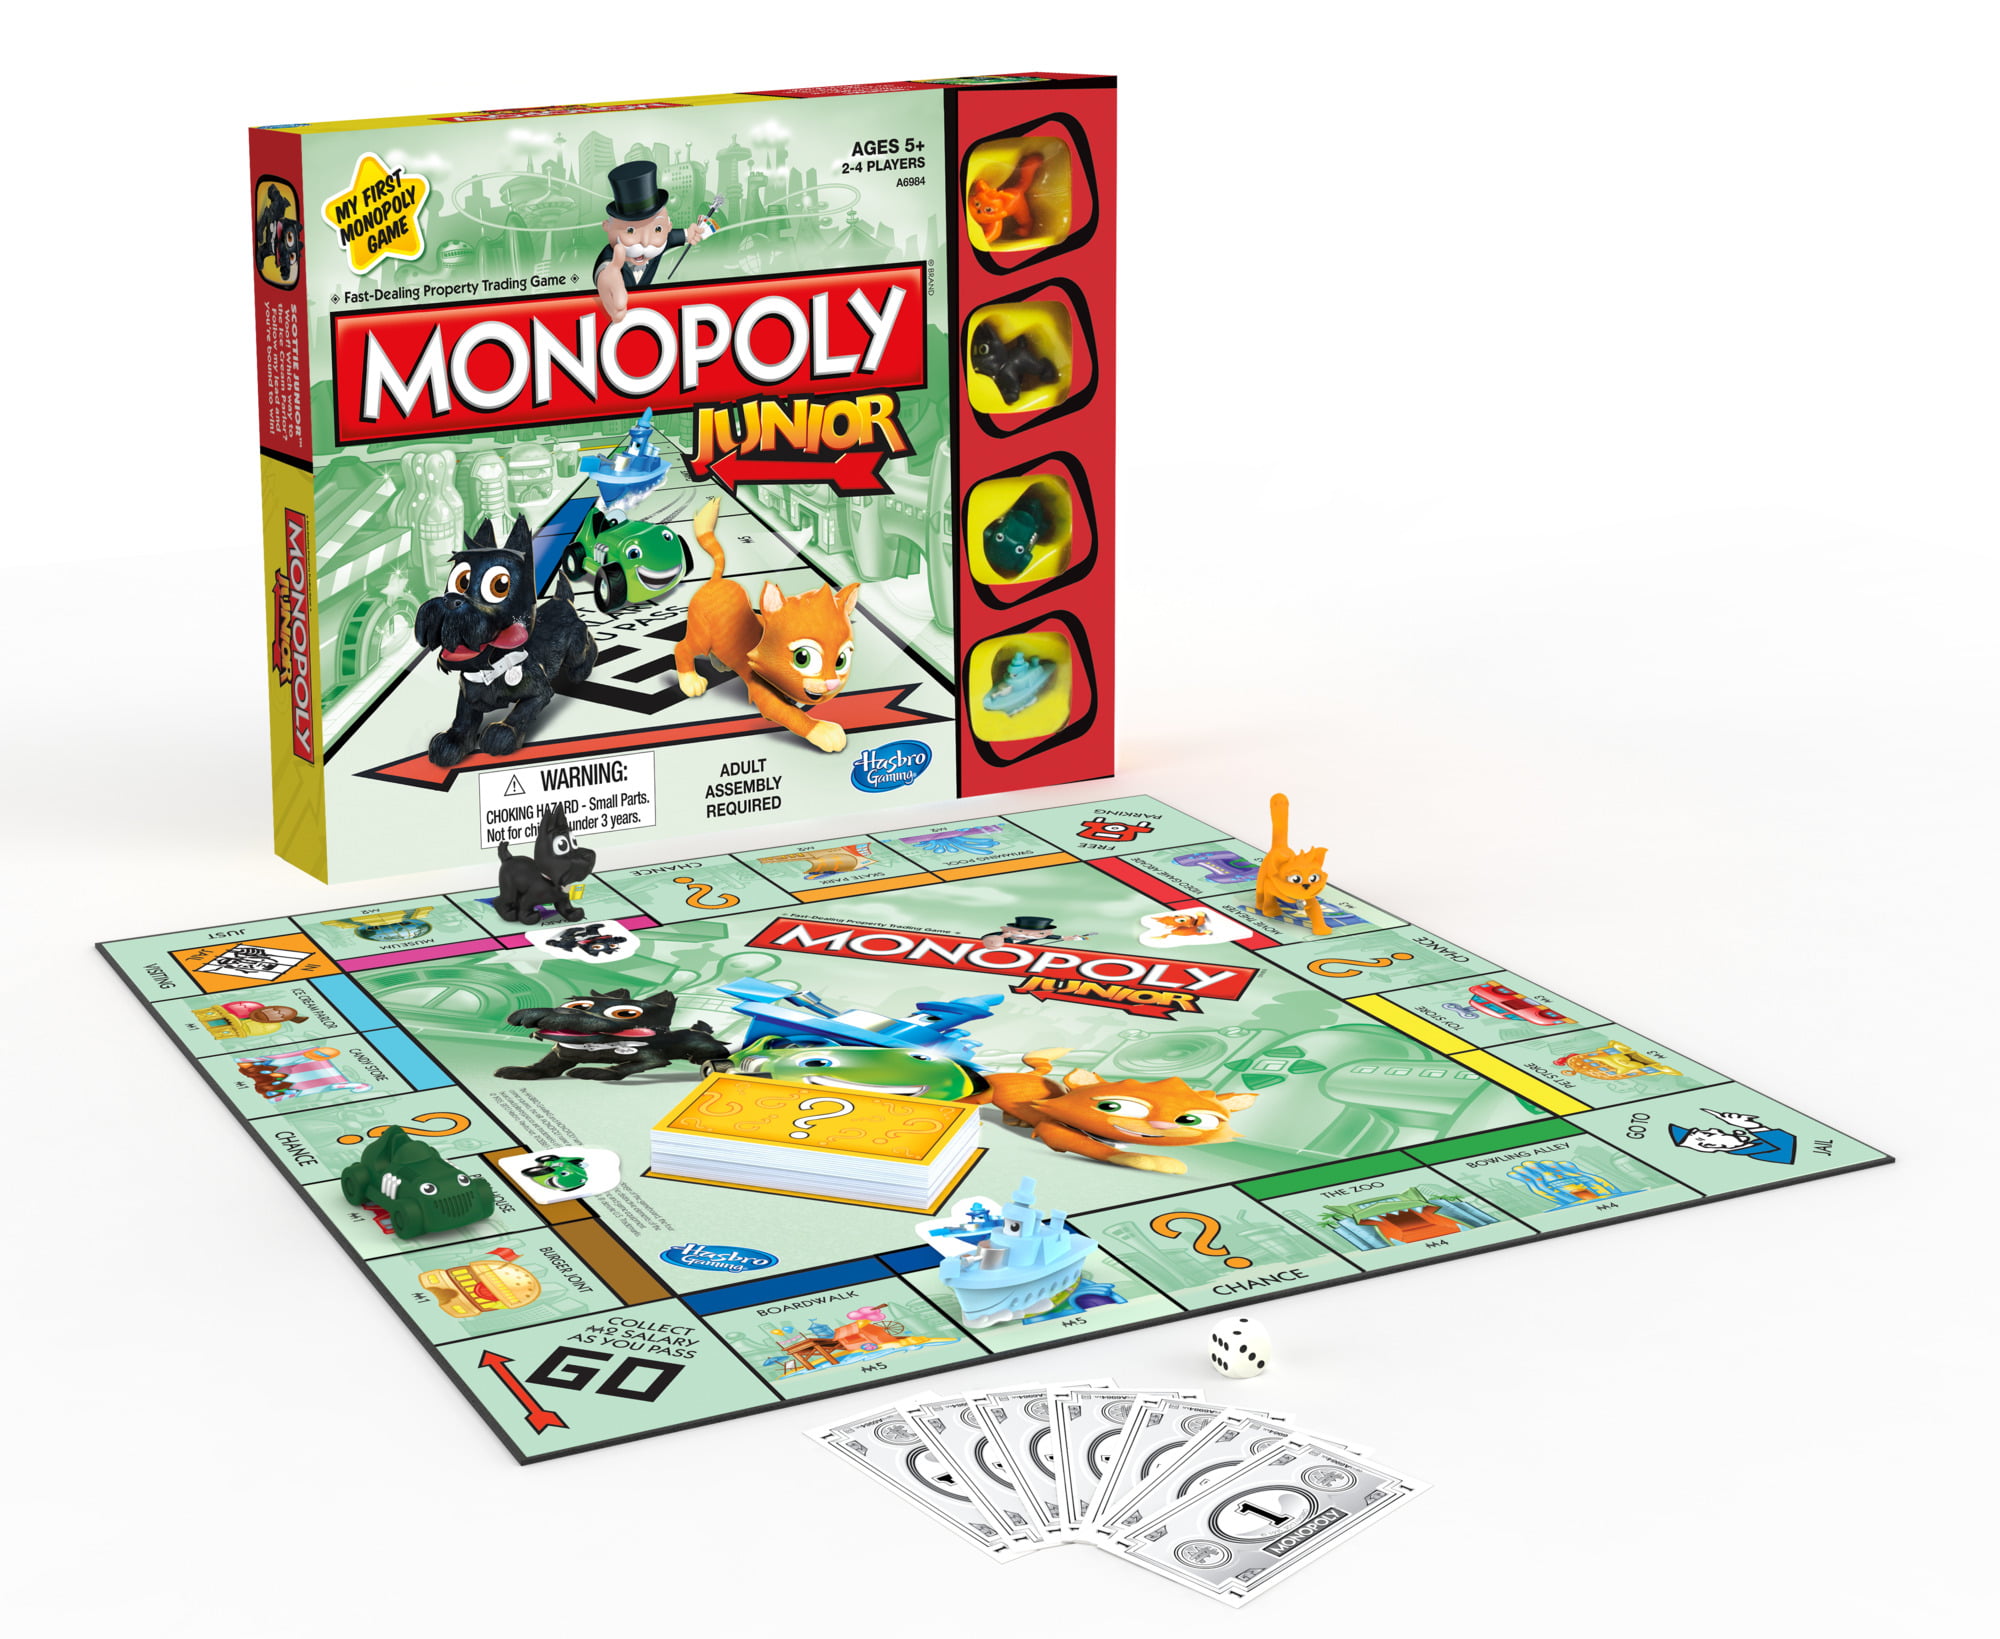 Board game monopoly junior 2 - new in blister the indestructible II